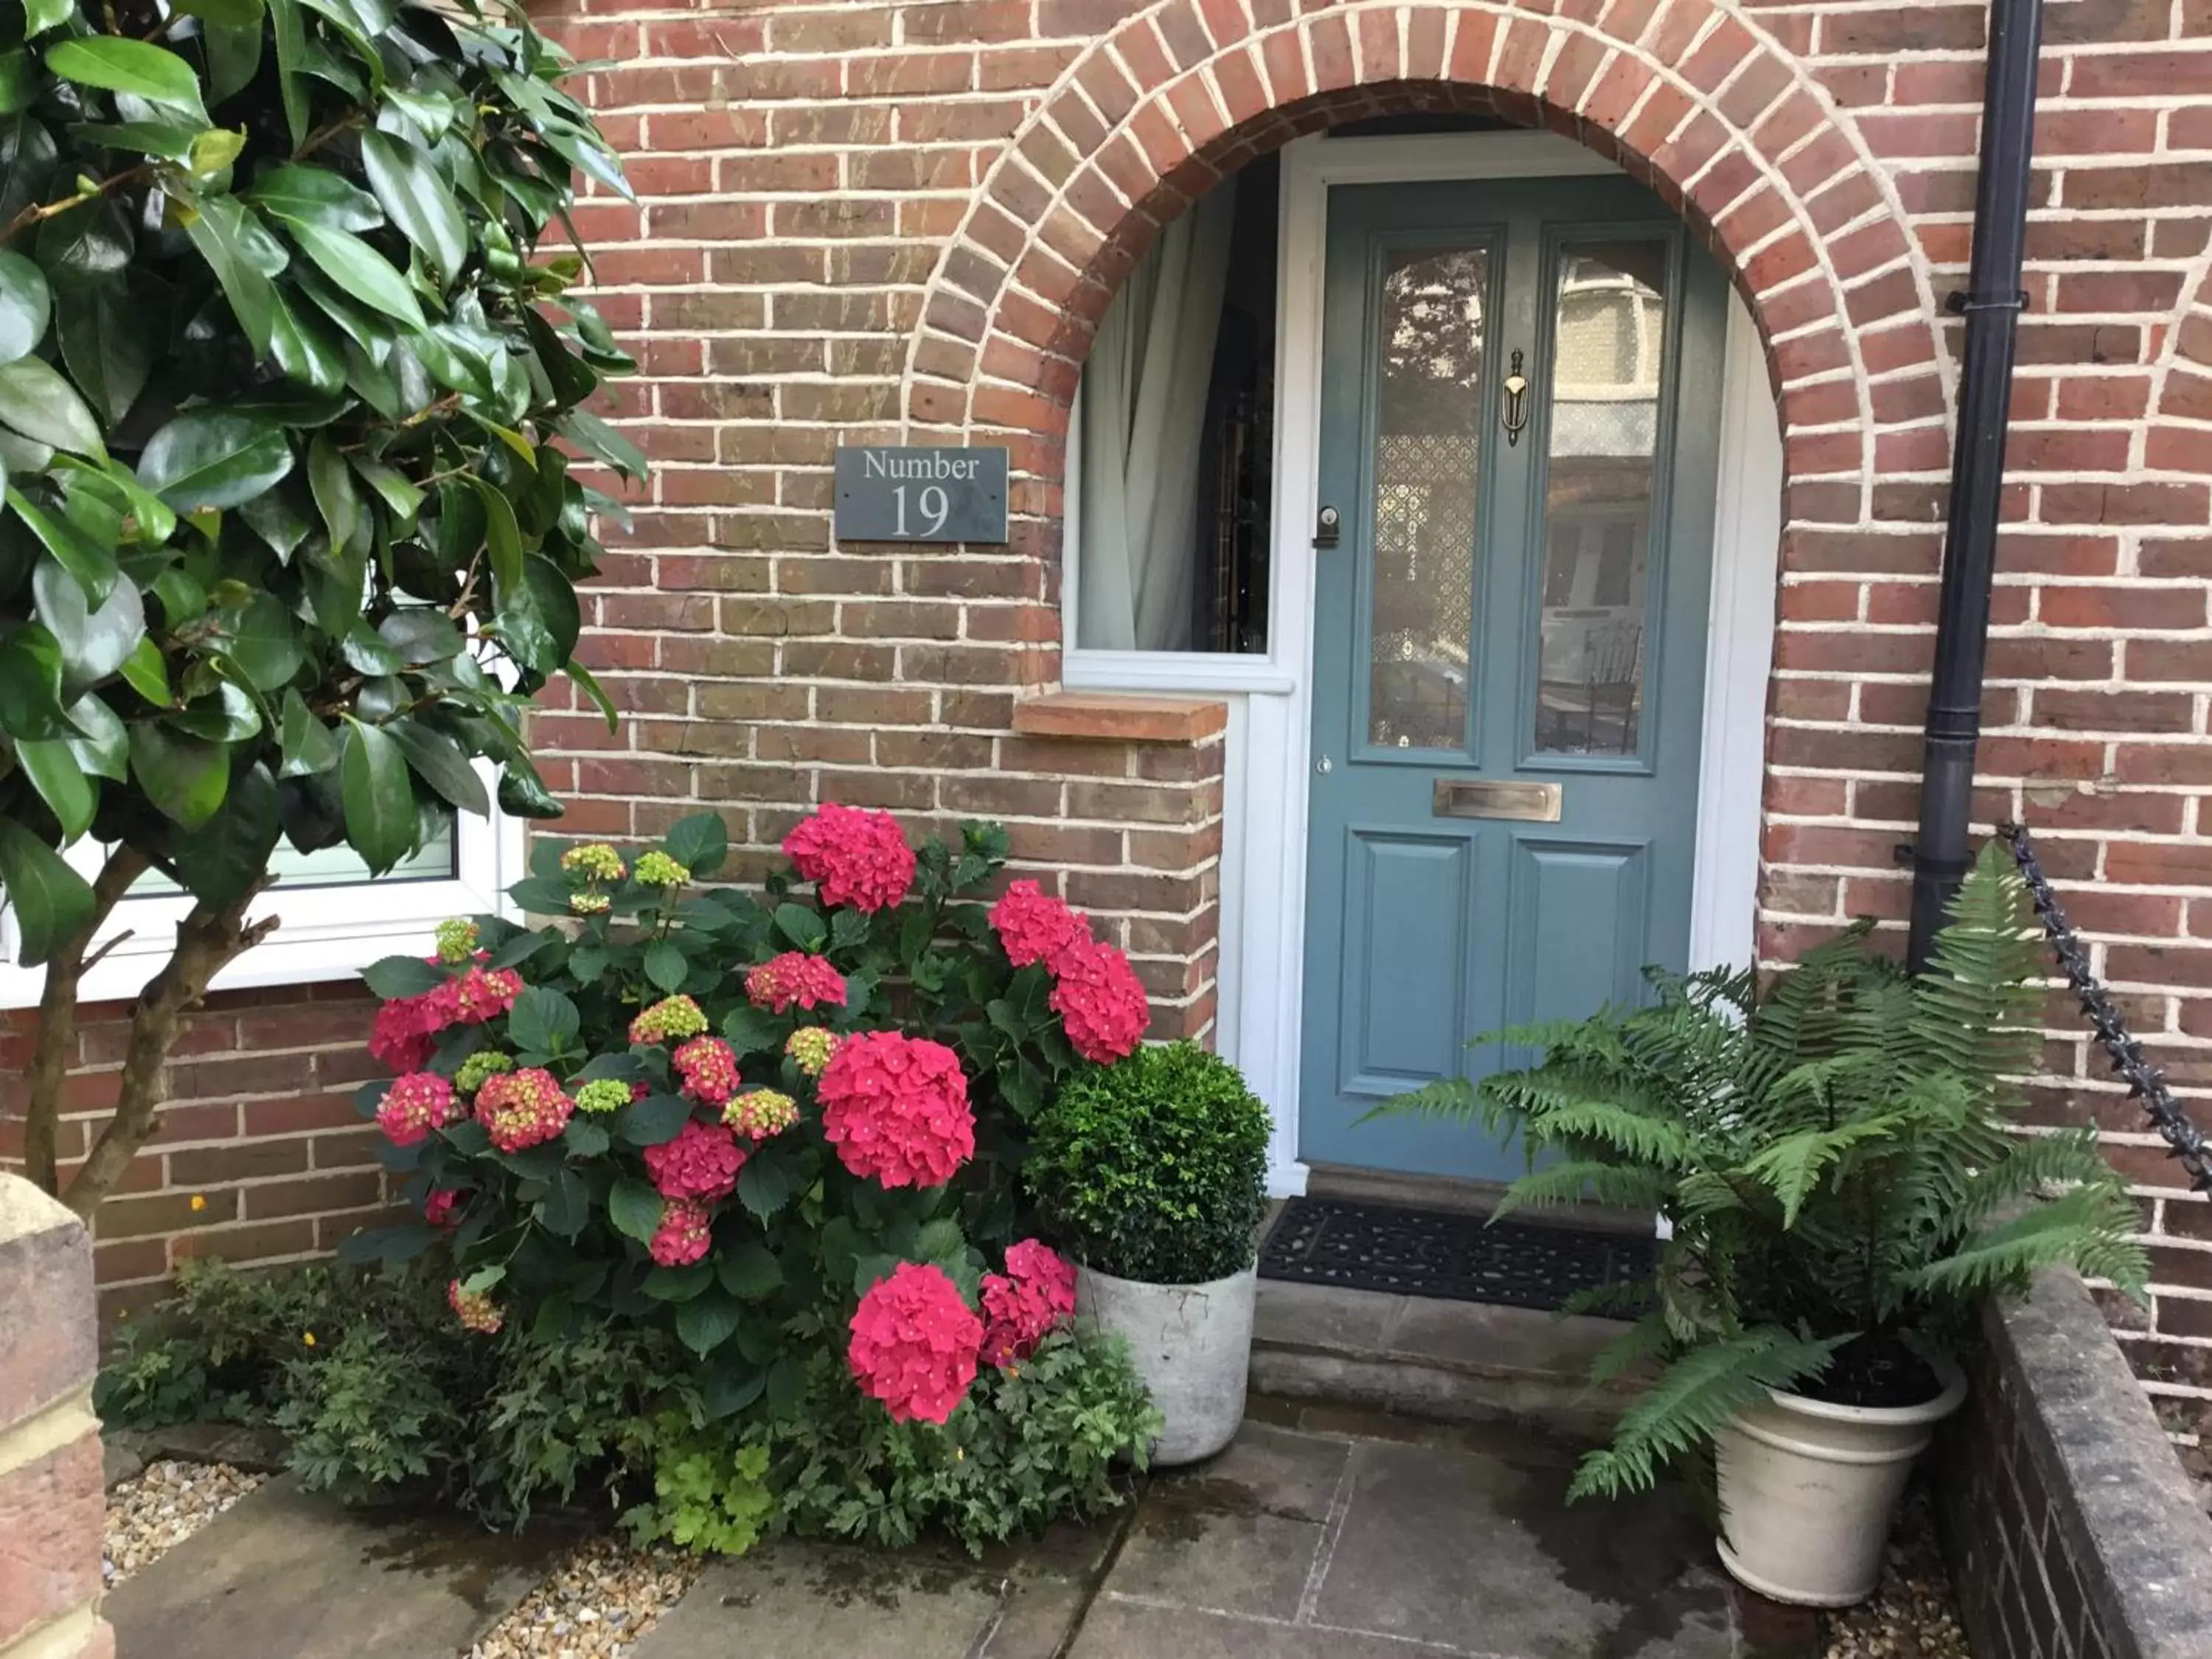 Property building in NUMBER 19 Chichester B&B